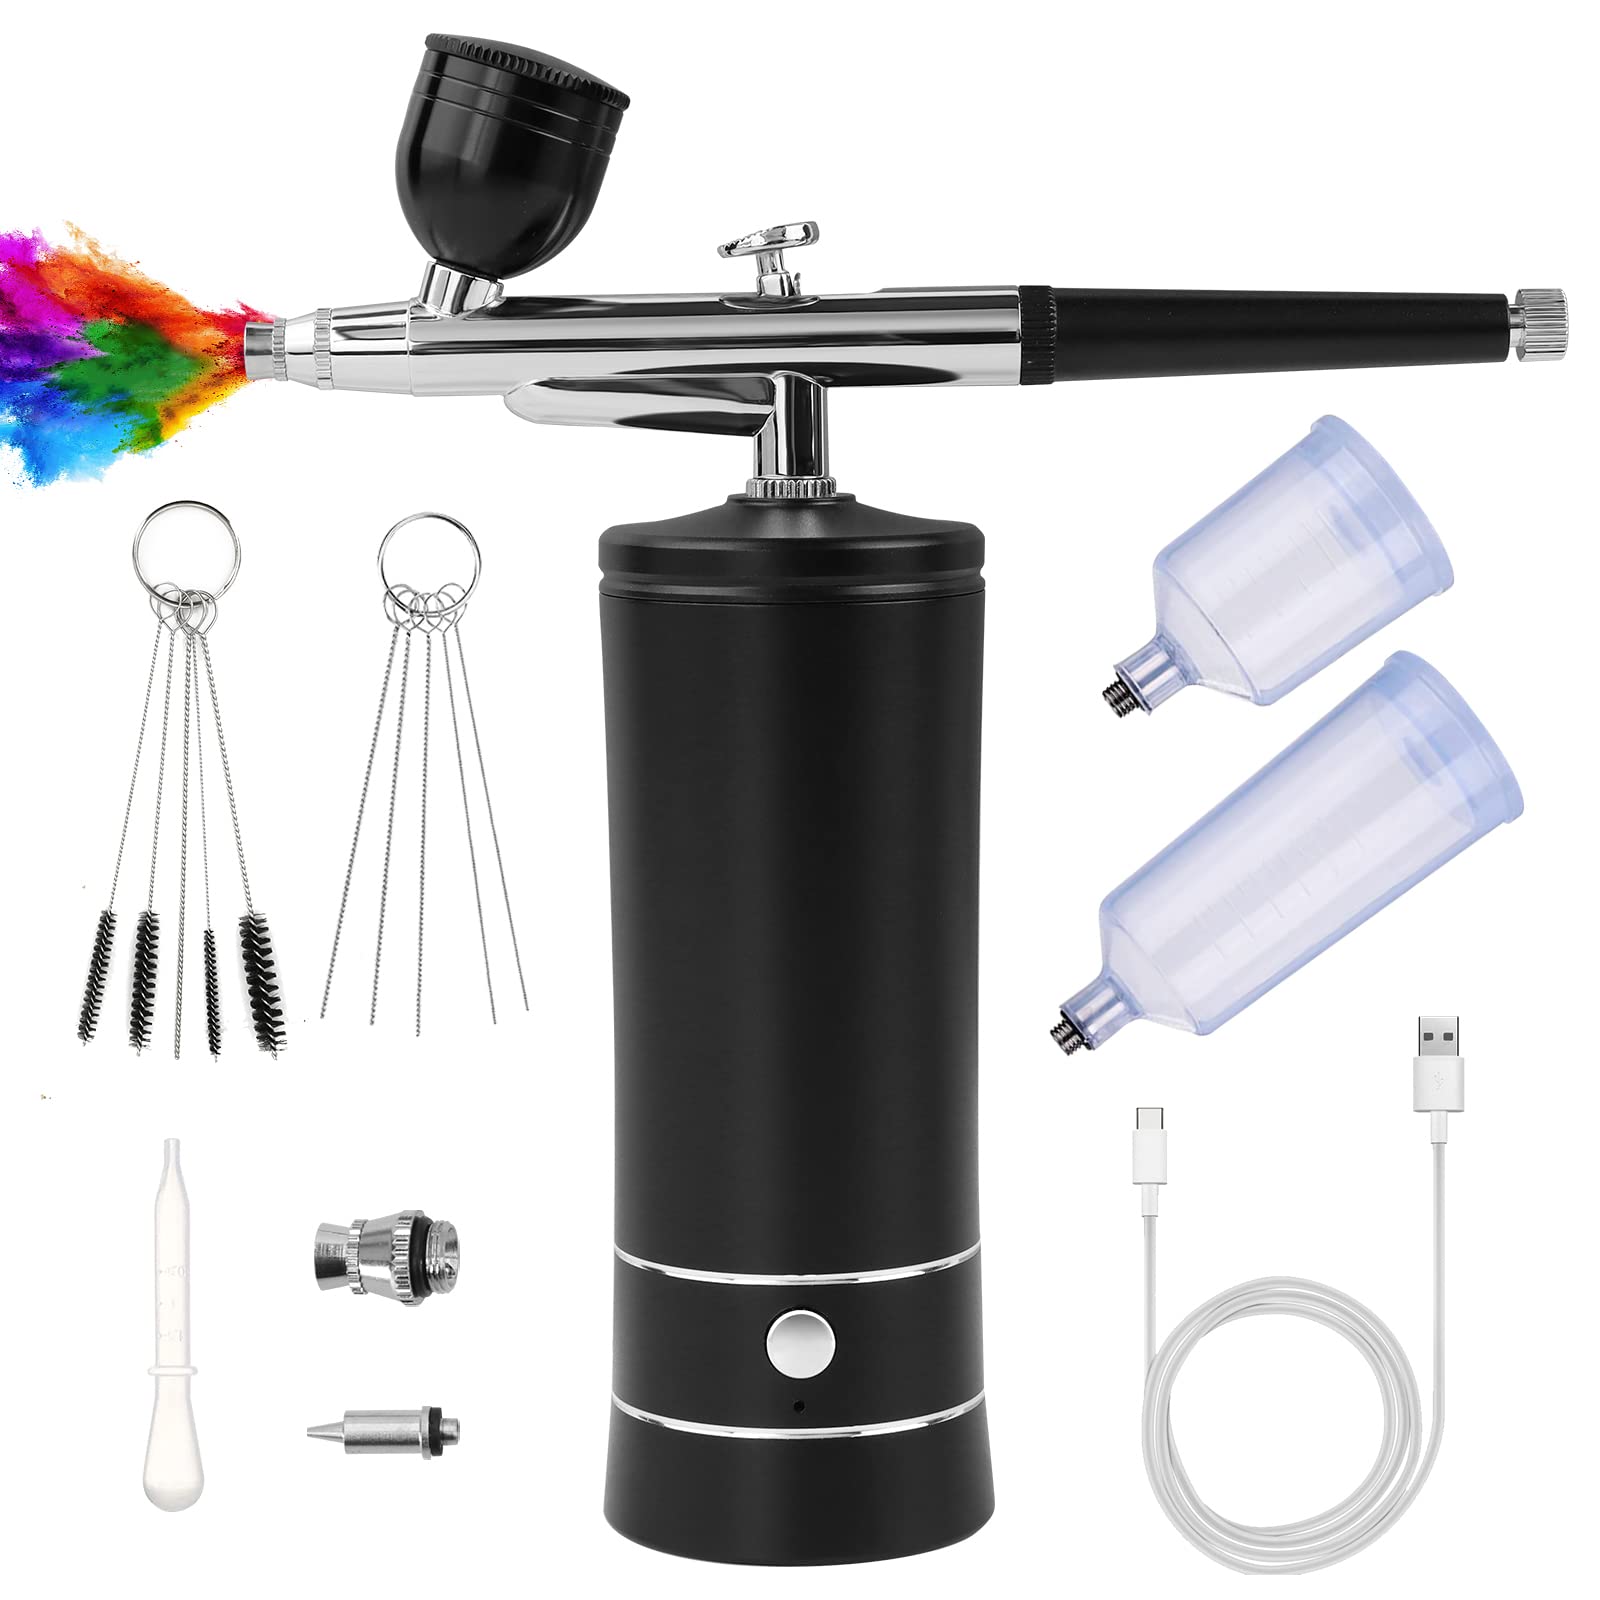  Anesty AHPPro High Pressure Cordless Airbrush Kit, Portable  Airbrush Compressor,Connect Air hose Compressor for Makeup,Cake  Decoration,Barber, Painting Model,Painting Nail Black : Arts, Crafts &  Sewing